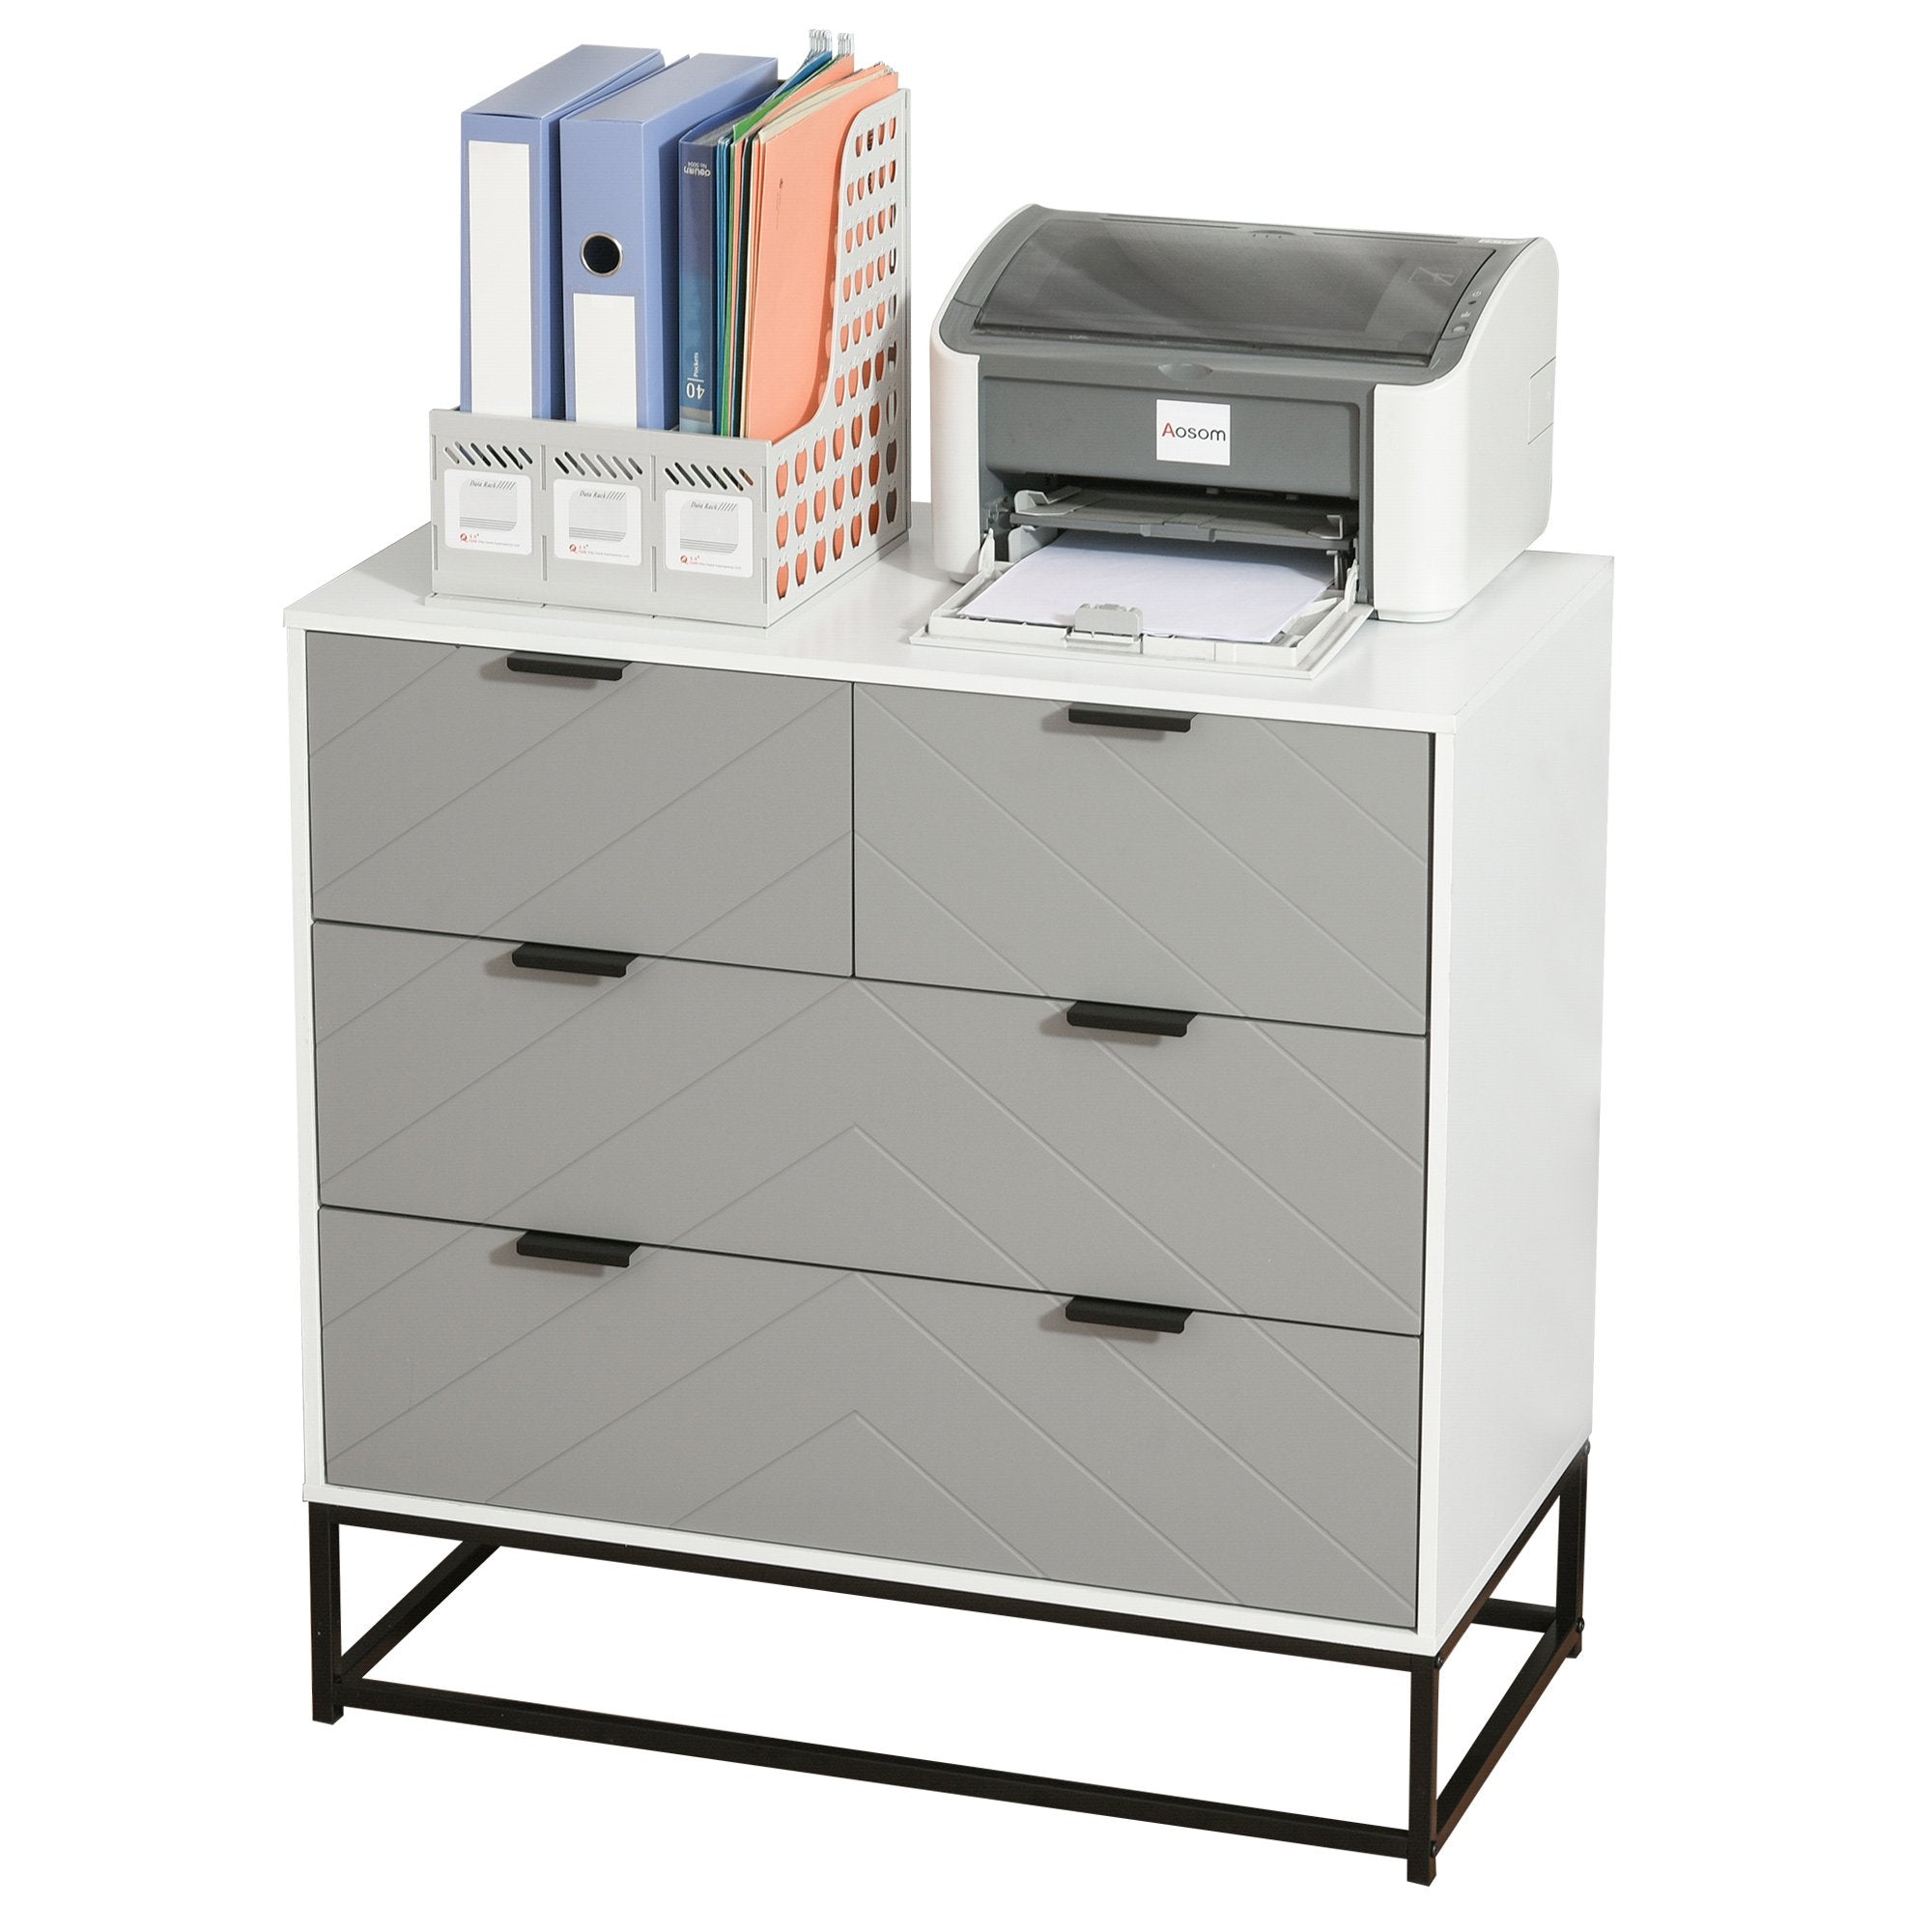 Particle Board 3-Tier Chest of Drawers Grey/White - Inspirely